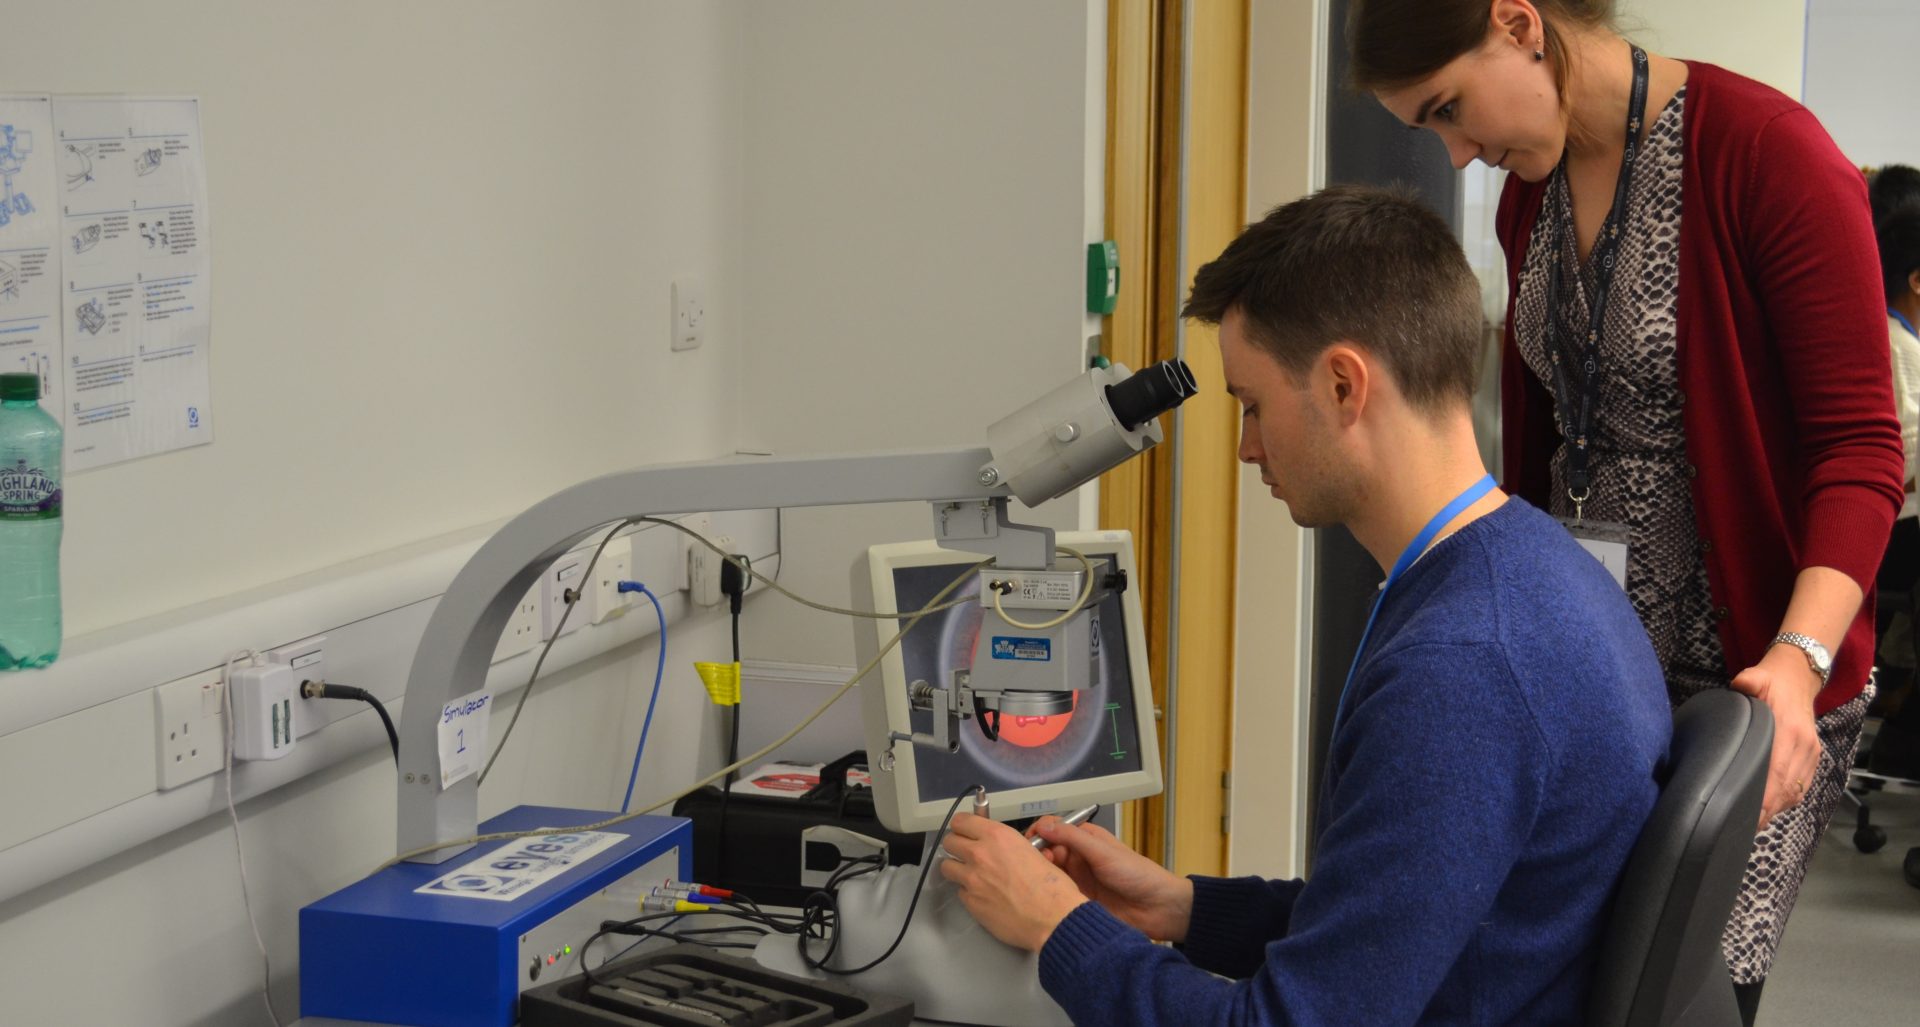 A trainee ophthalmologist being supervised on an eyesi surgical simulator